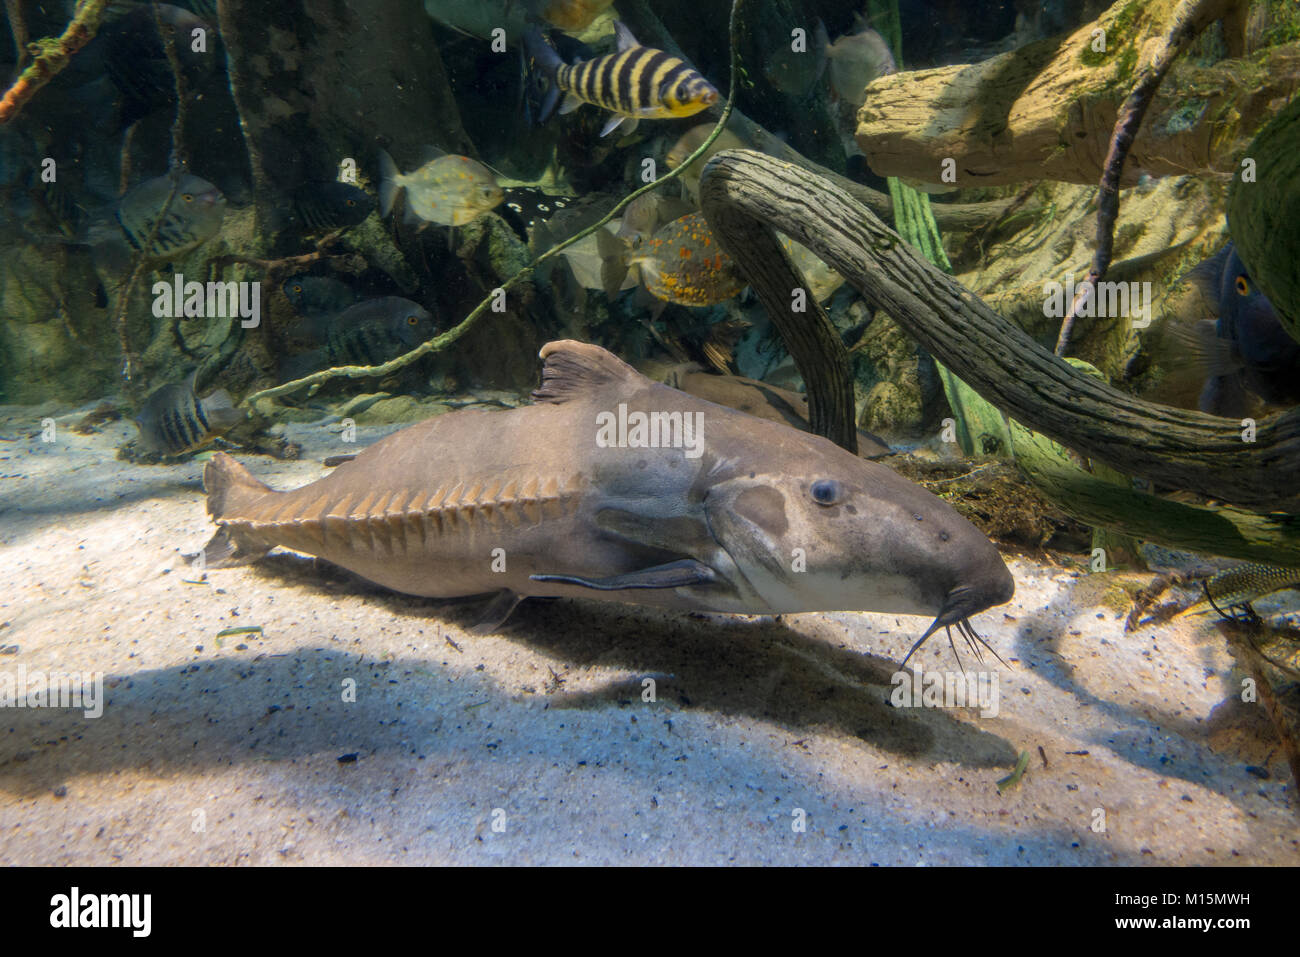 A Black armored catfish on display in the National Aquarium, Baltimore, Maryland, United States. Stock Photo